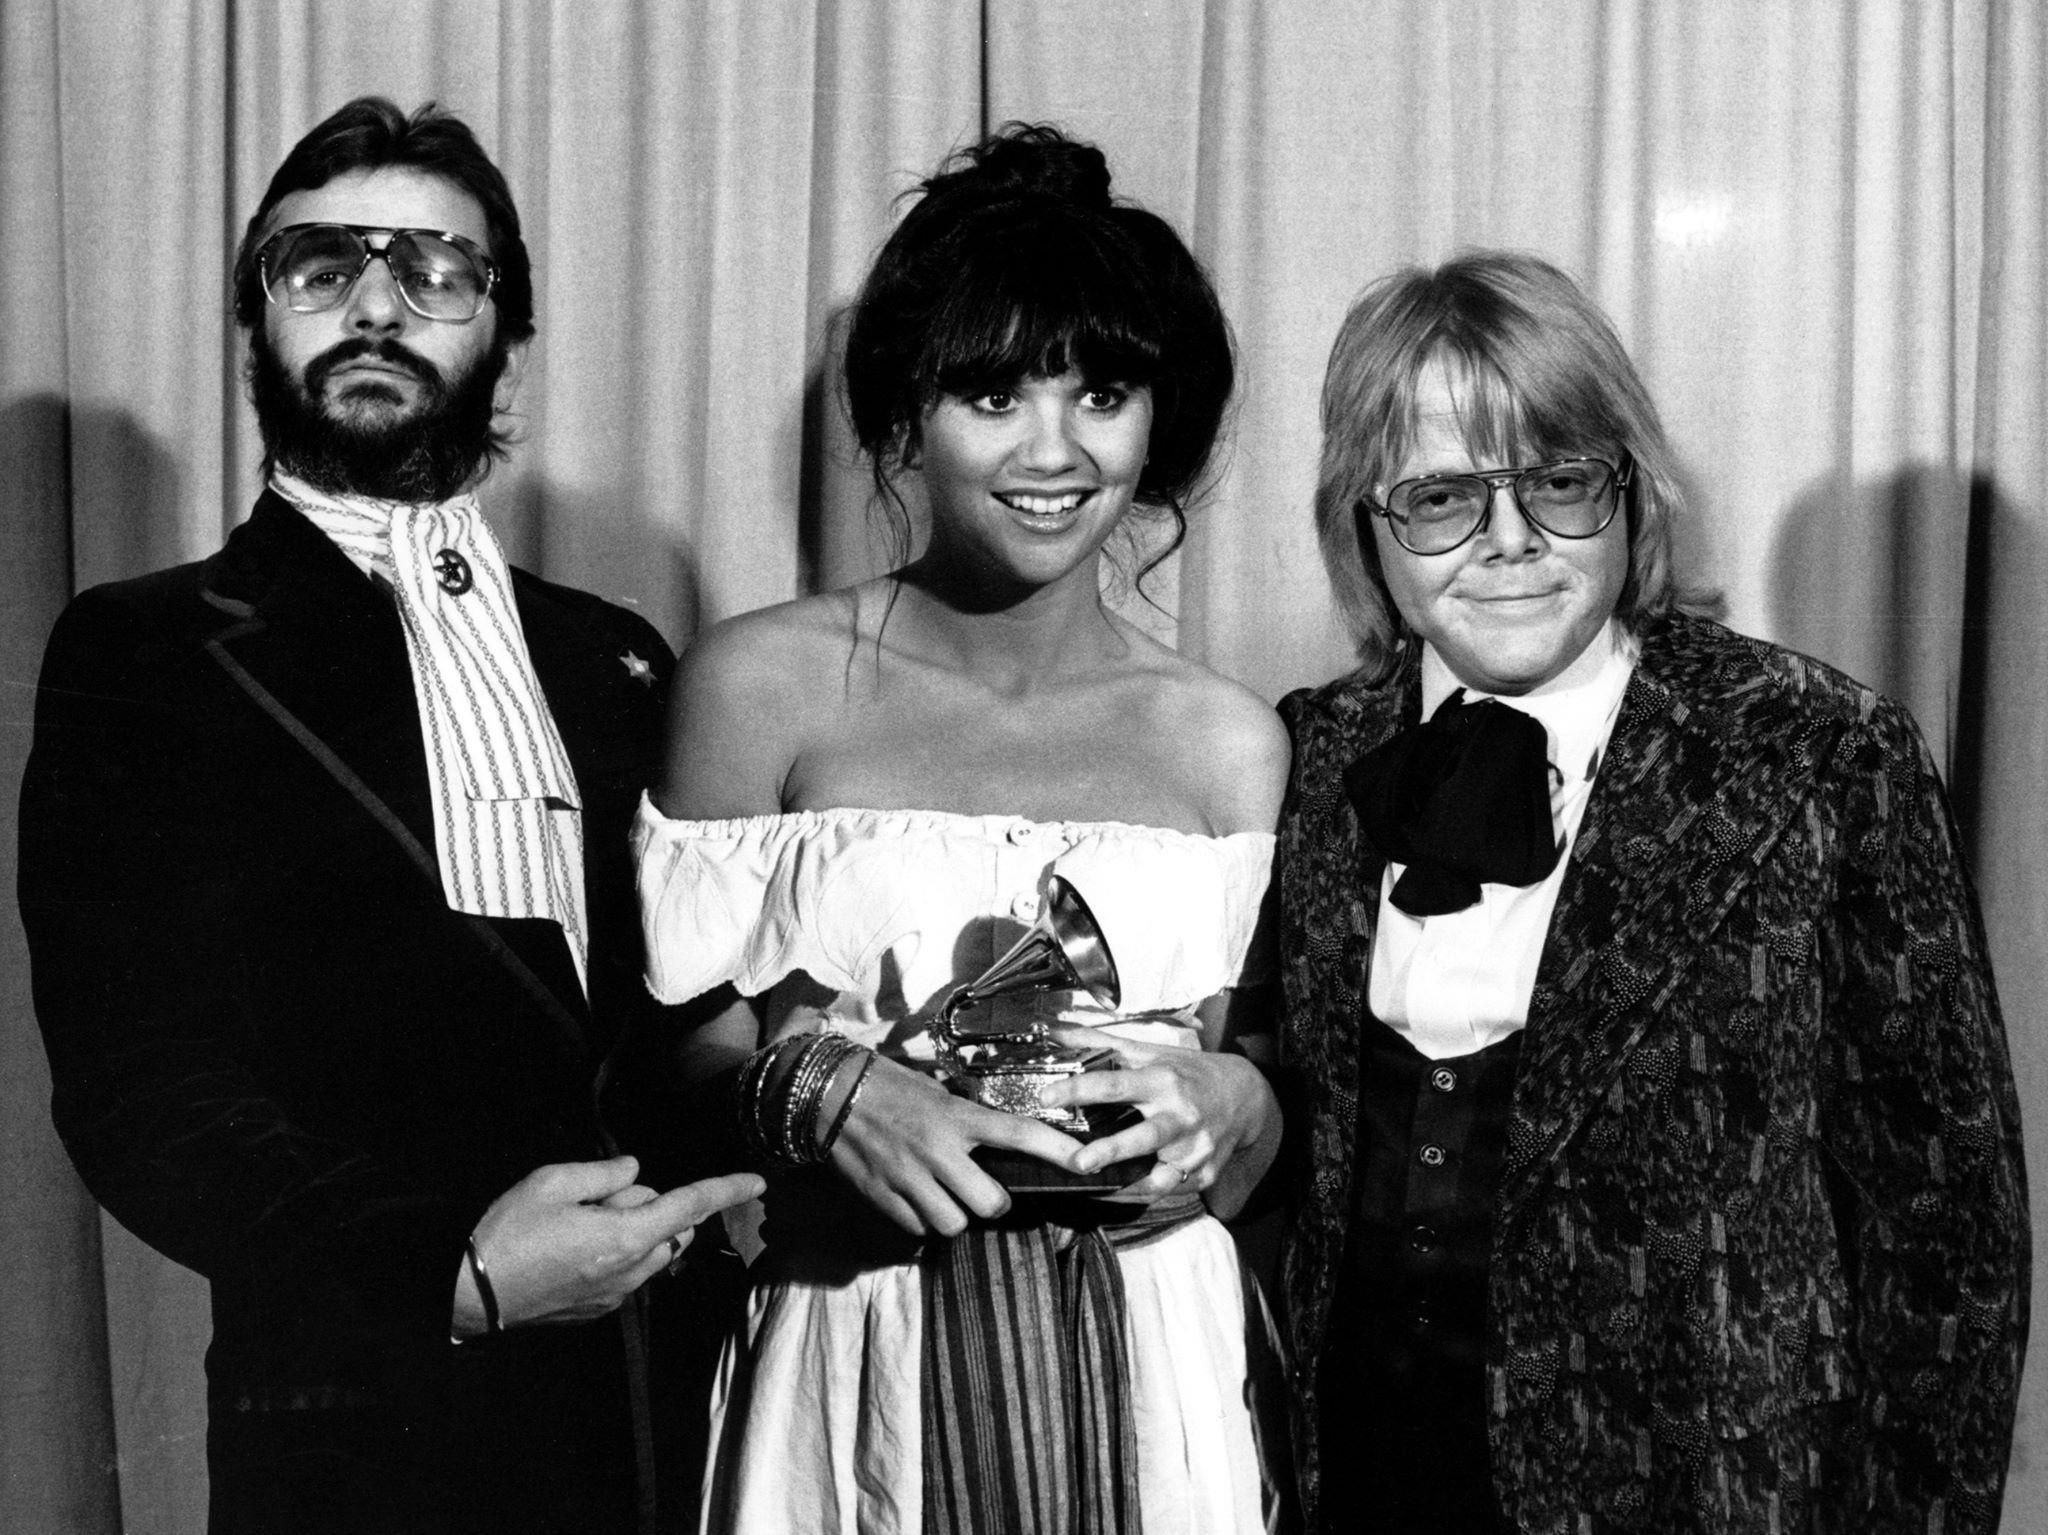 <p><span>At the 1977 Grammy Awards, three of music's most celebrated stars shined brightly on stage. Ringo Starr, Linda Ronstadt, and Paul Williams were all nominated for awards that night, making it a star-studded event. The audience was in awe as they watched Ringo perform his hit single "It Don't Come Easy", while Linda sang her beautiful rendition of Roy Orbison's classic "Blue Bayou". Later in the evening, Paul won two Grammys for Best Original Score Written for a Motion Picture or Television Show and Song of the Year for "Evergreen" from A Star is Born. It was an unforgettable night full of nostalgia, celebration, and joy - one that will be remembered by fans for years to come!</span></p>